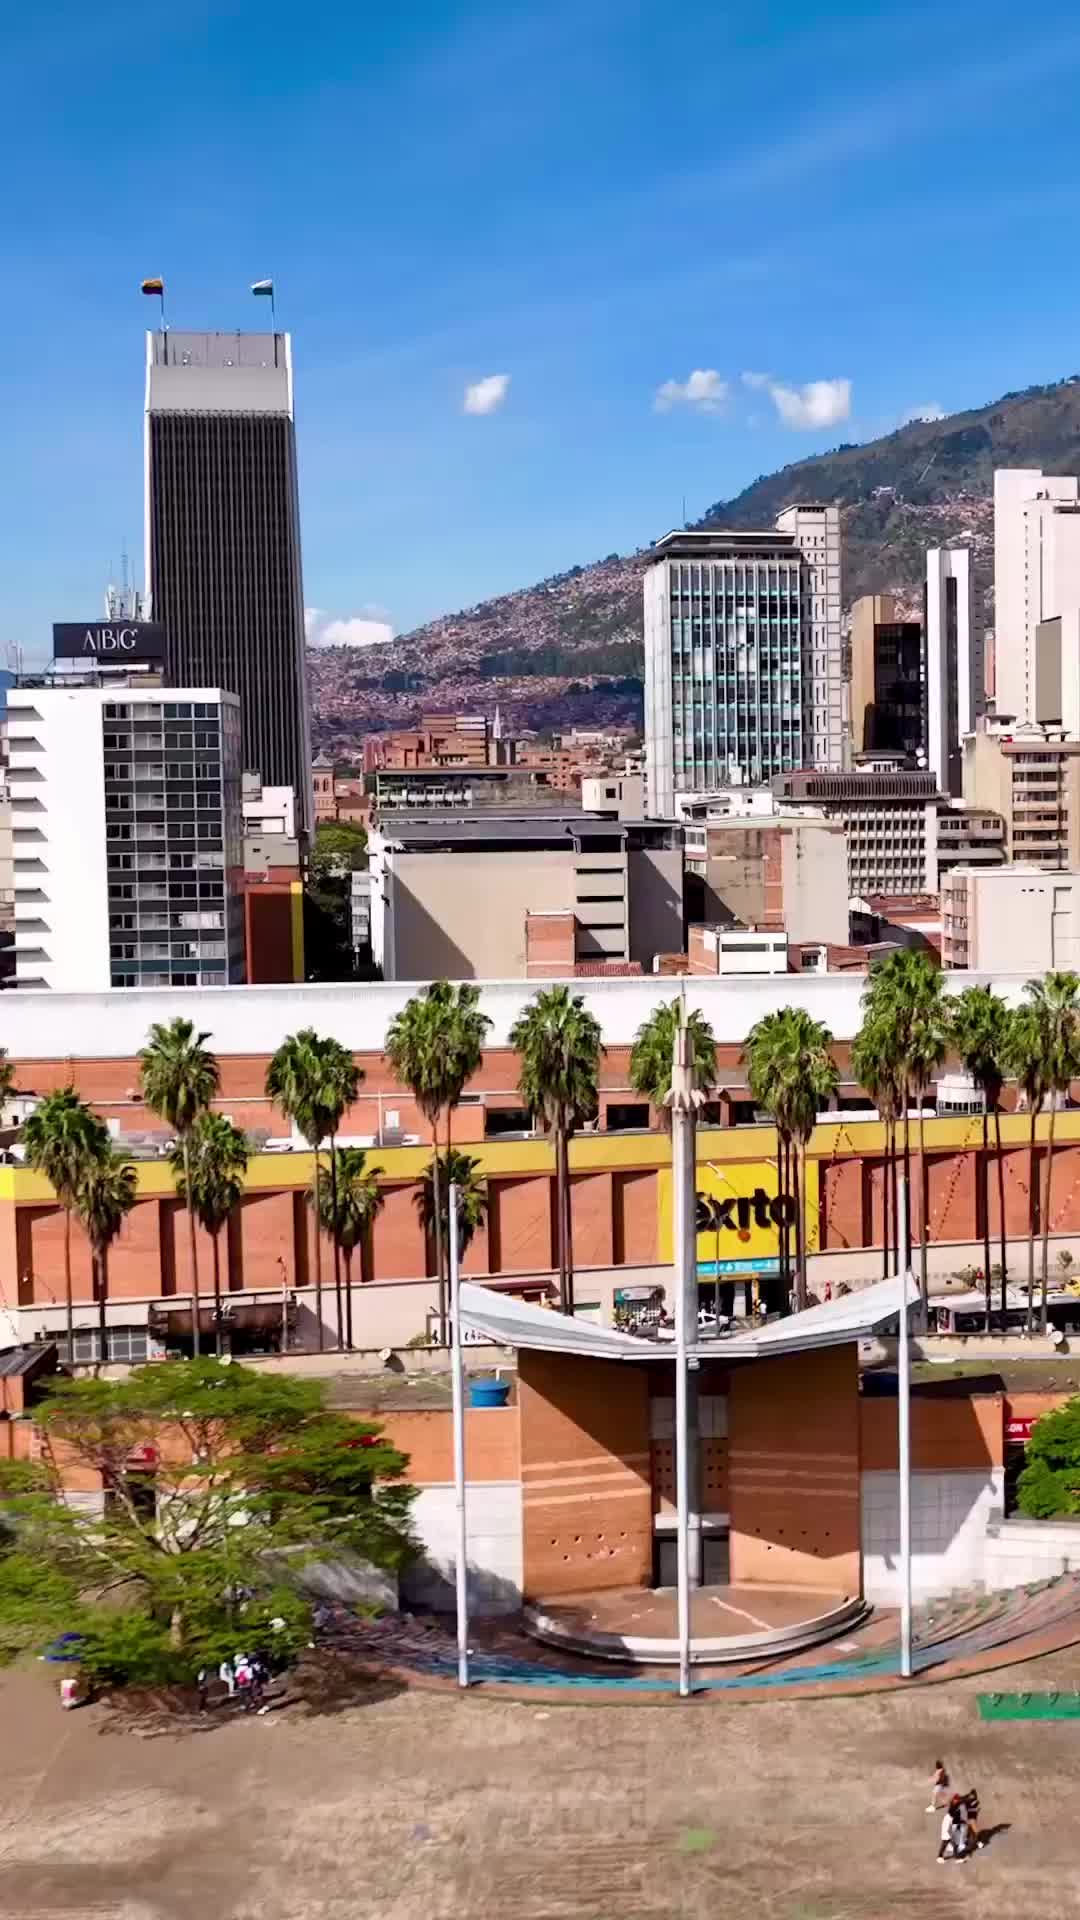 Palm Trees in Medellin, Colombia - Cityscape Views 🌴🏙️